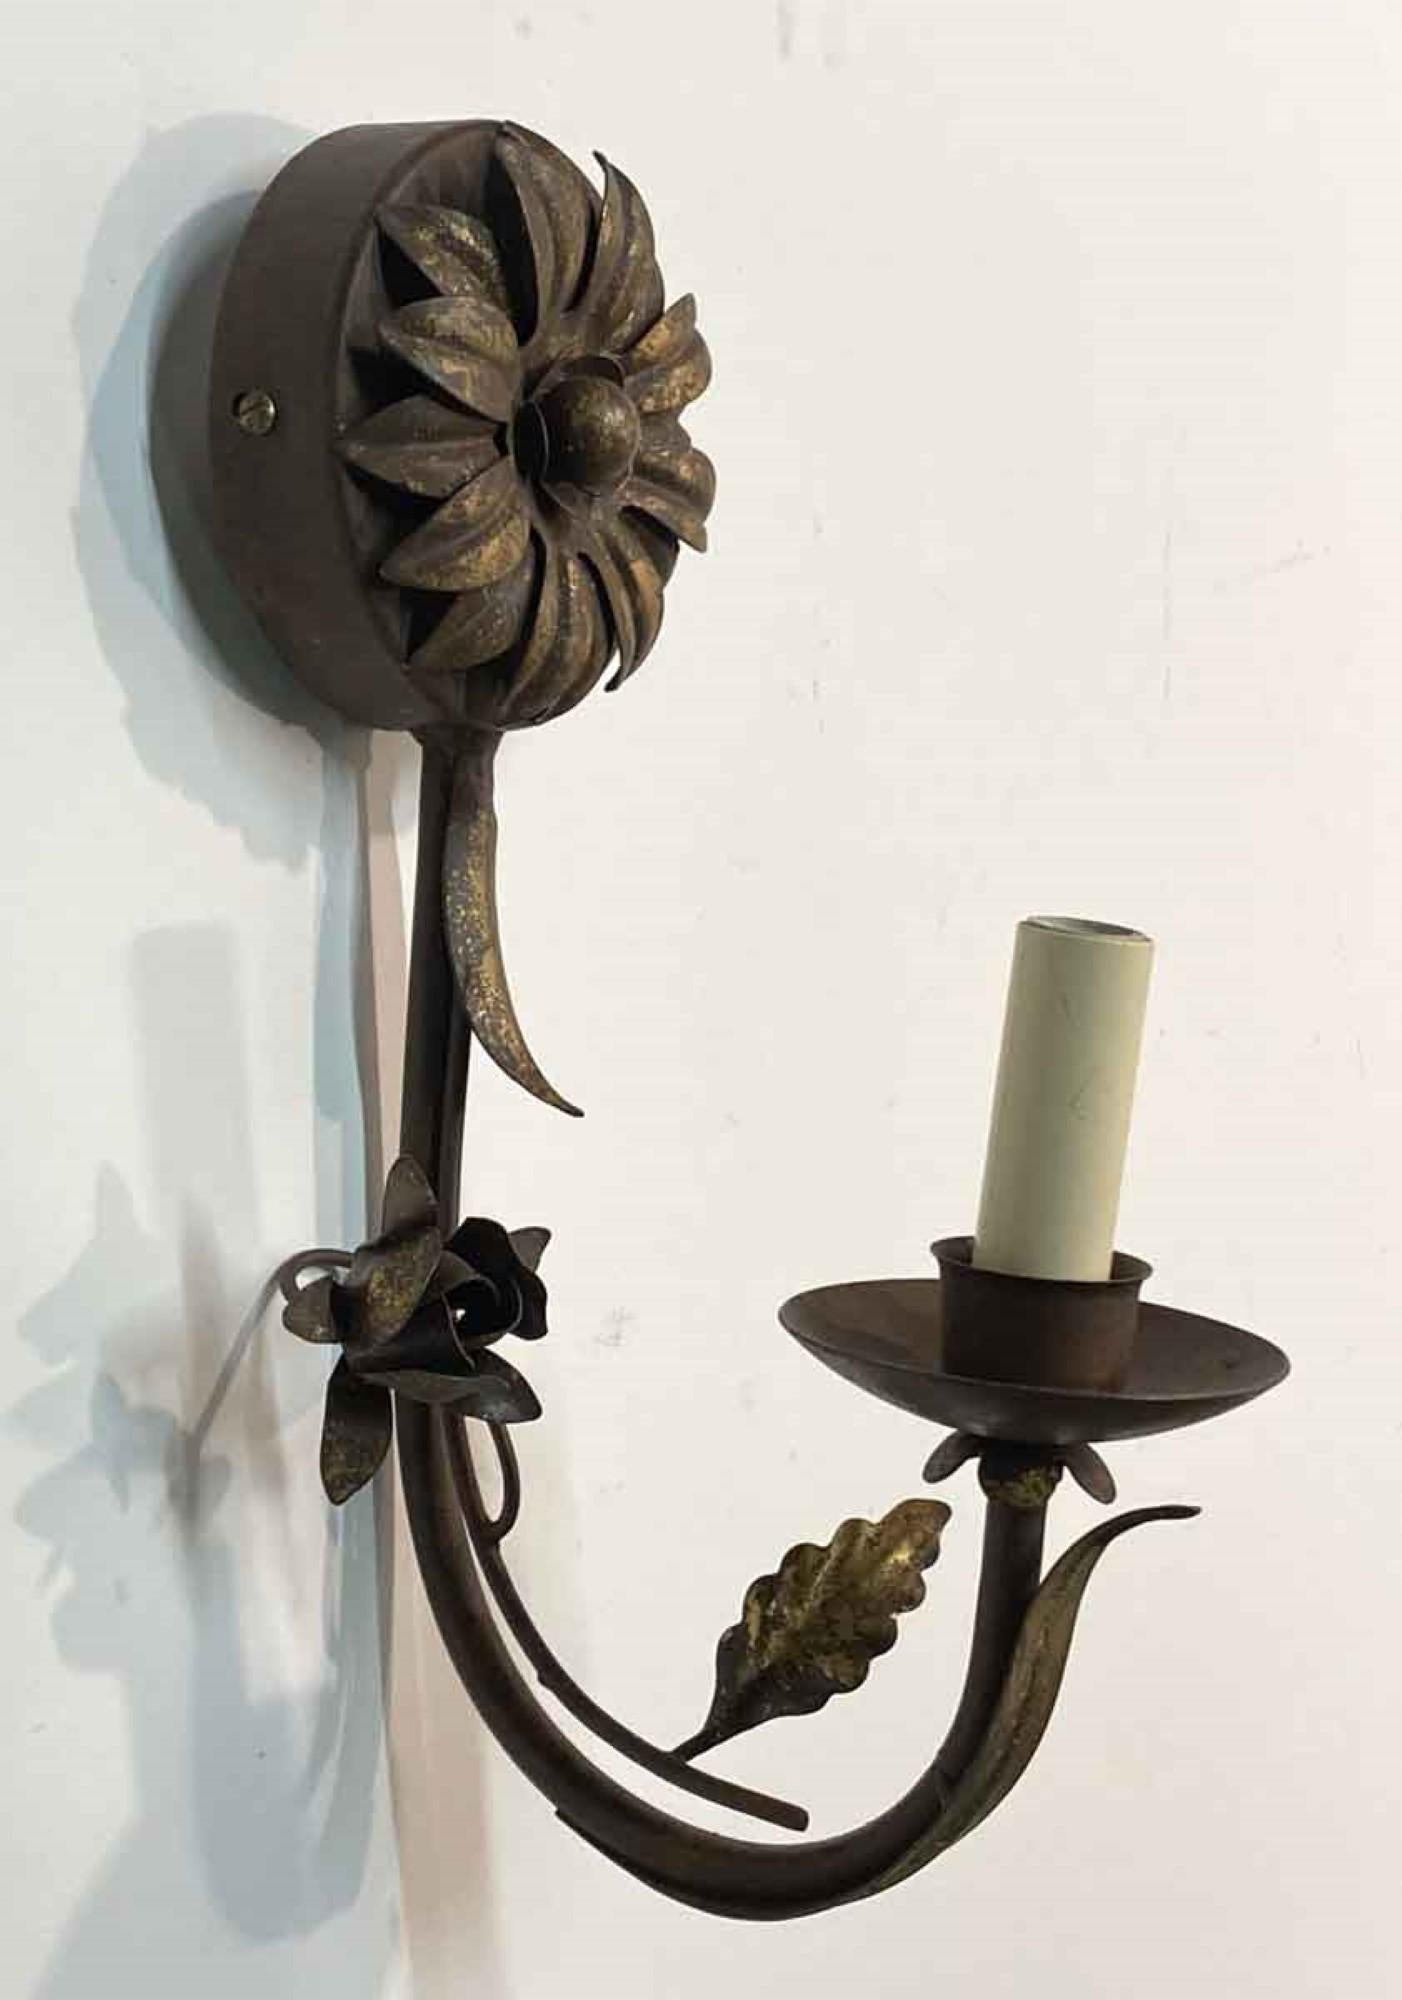 2000s Italian Florentine Wall Sconce in a Gold Gilt Hand Wrought Iron, Qty Avail 2